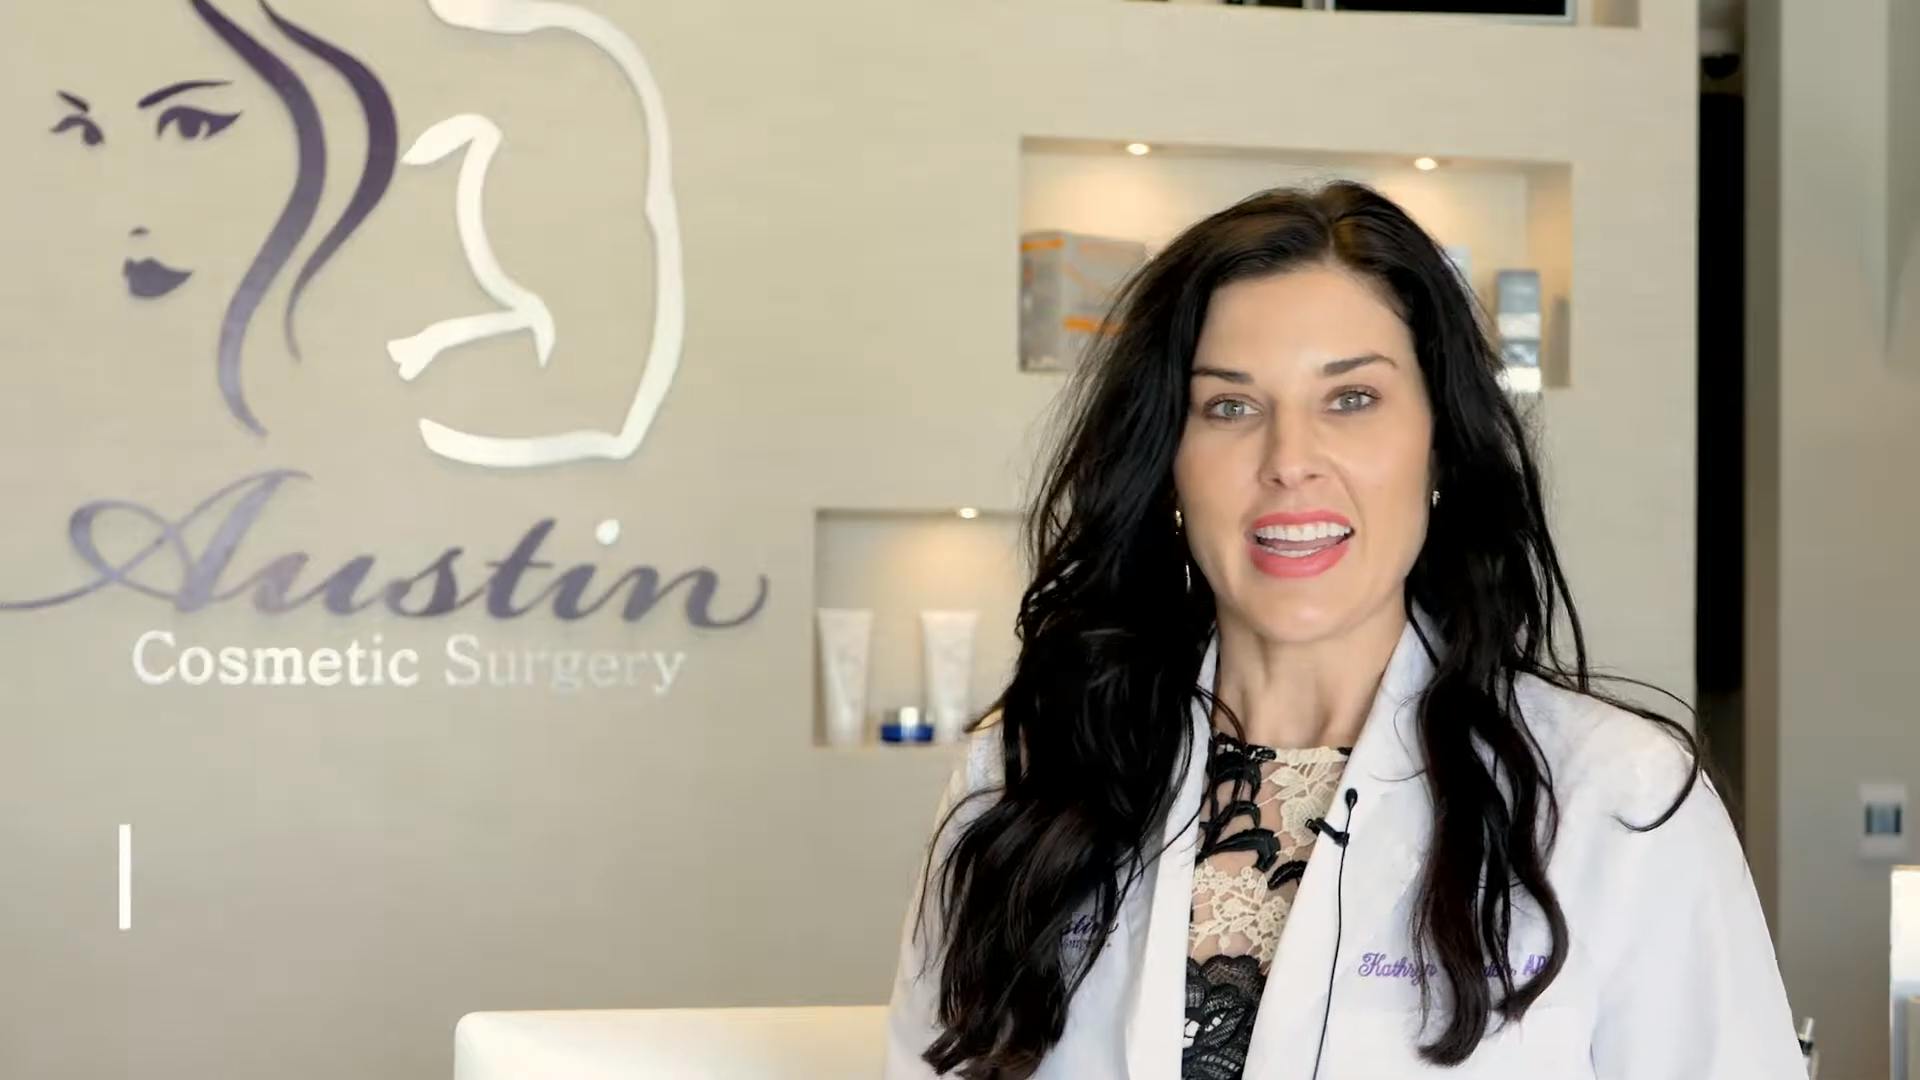 a still from an interview with one of the staff members at Austin Cosmetic Surgery